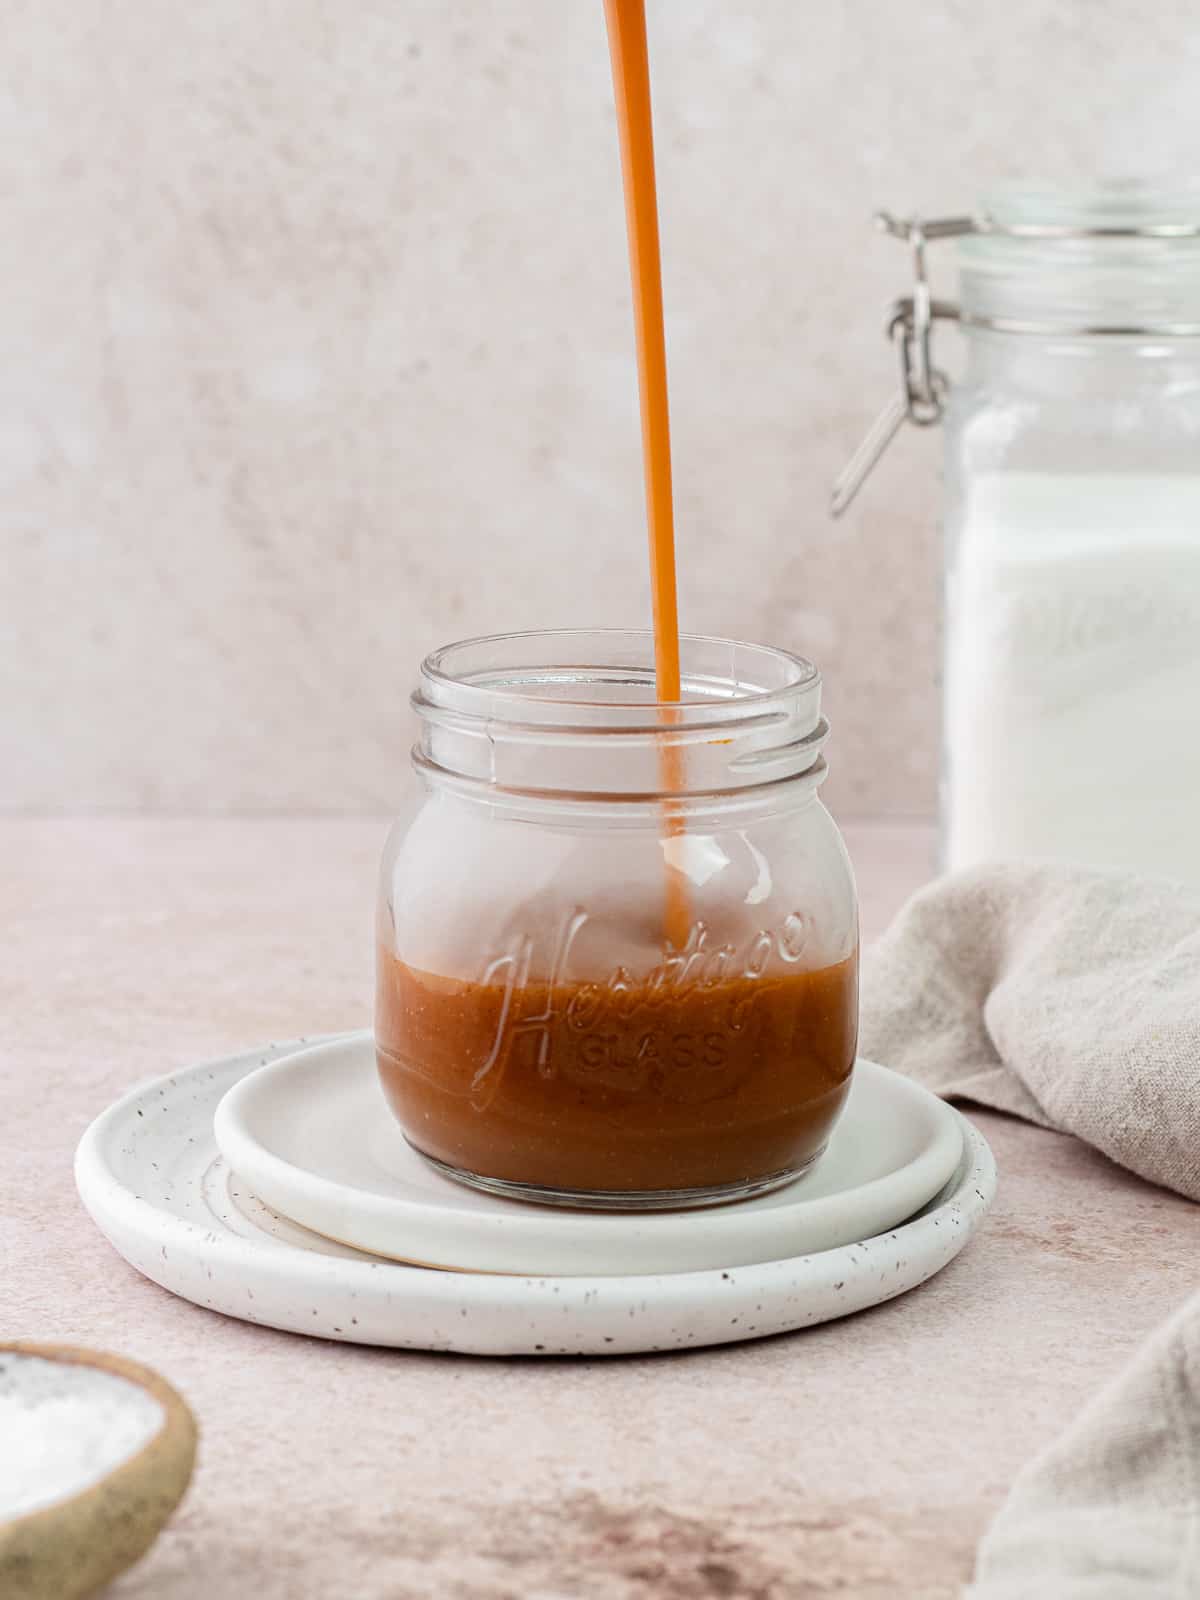 Salted caramel sauce being poured into glass jar